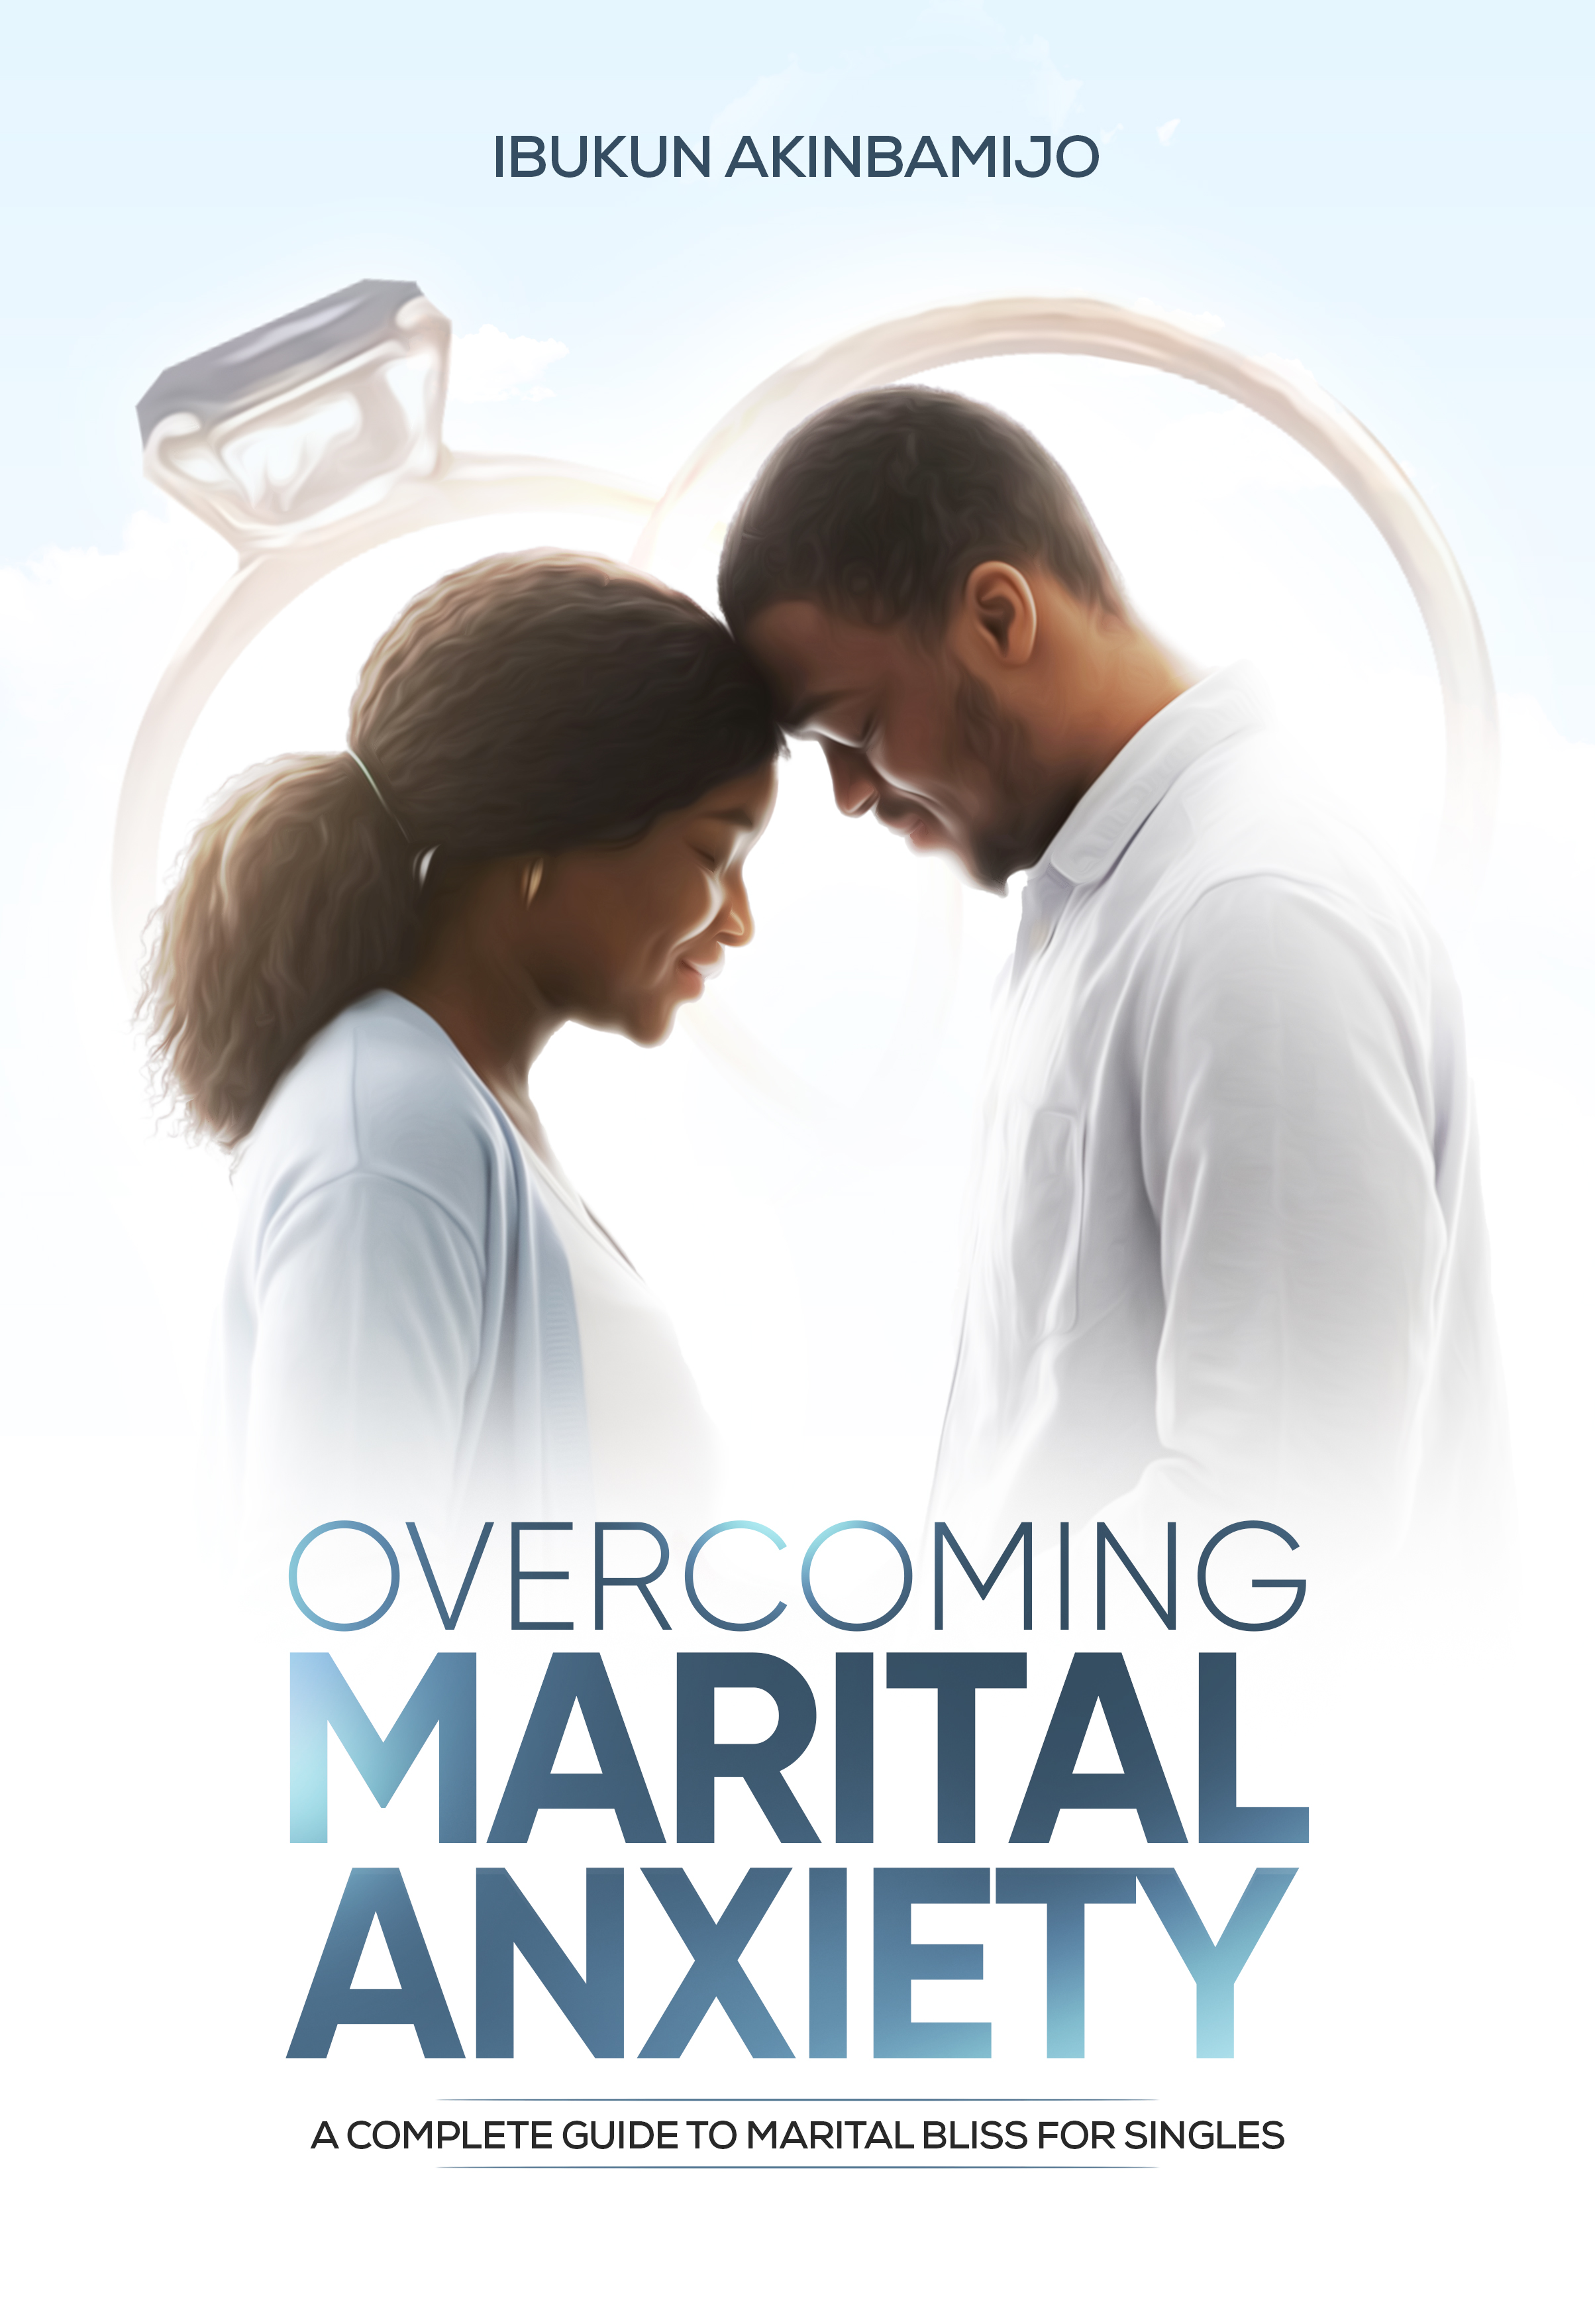 Overcoming-Marital-Anxiety---A-Complete-Guide-to-Marital-Bliss-for-Singles